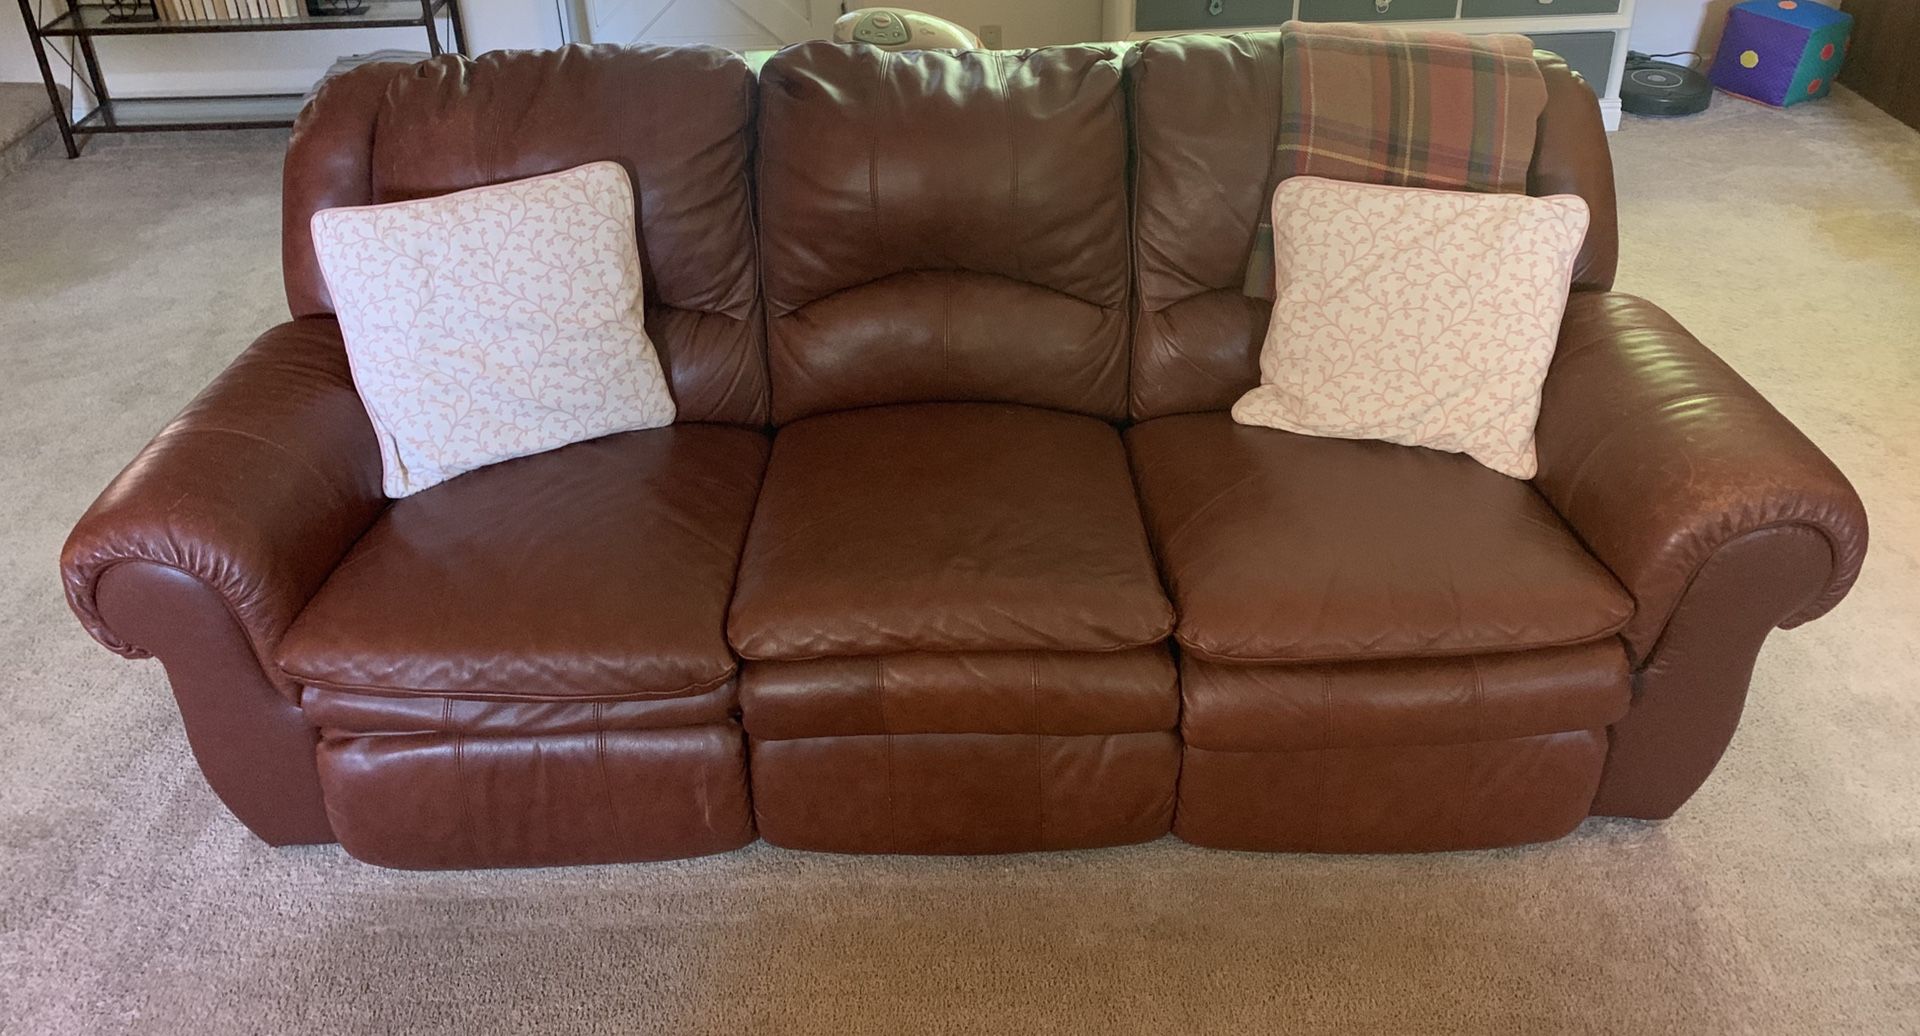 Leather Recliner Couch